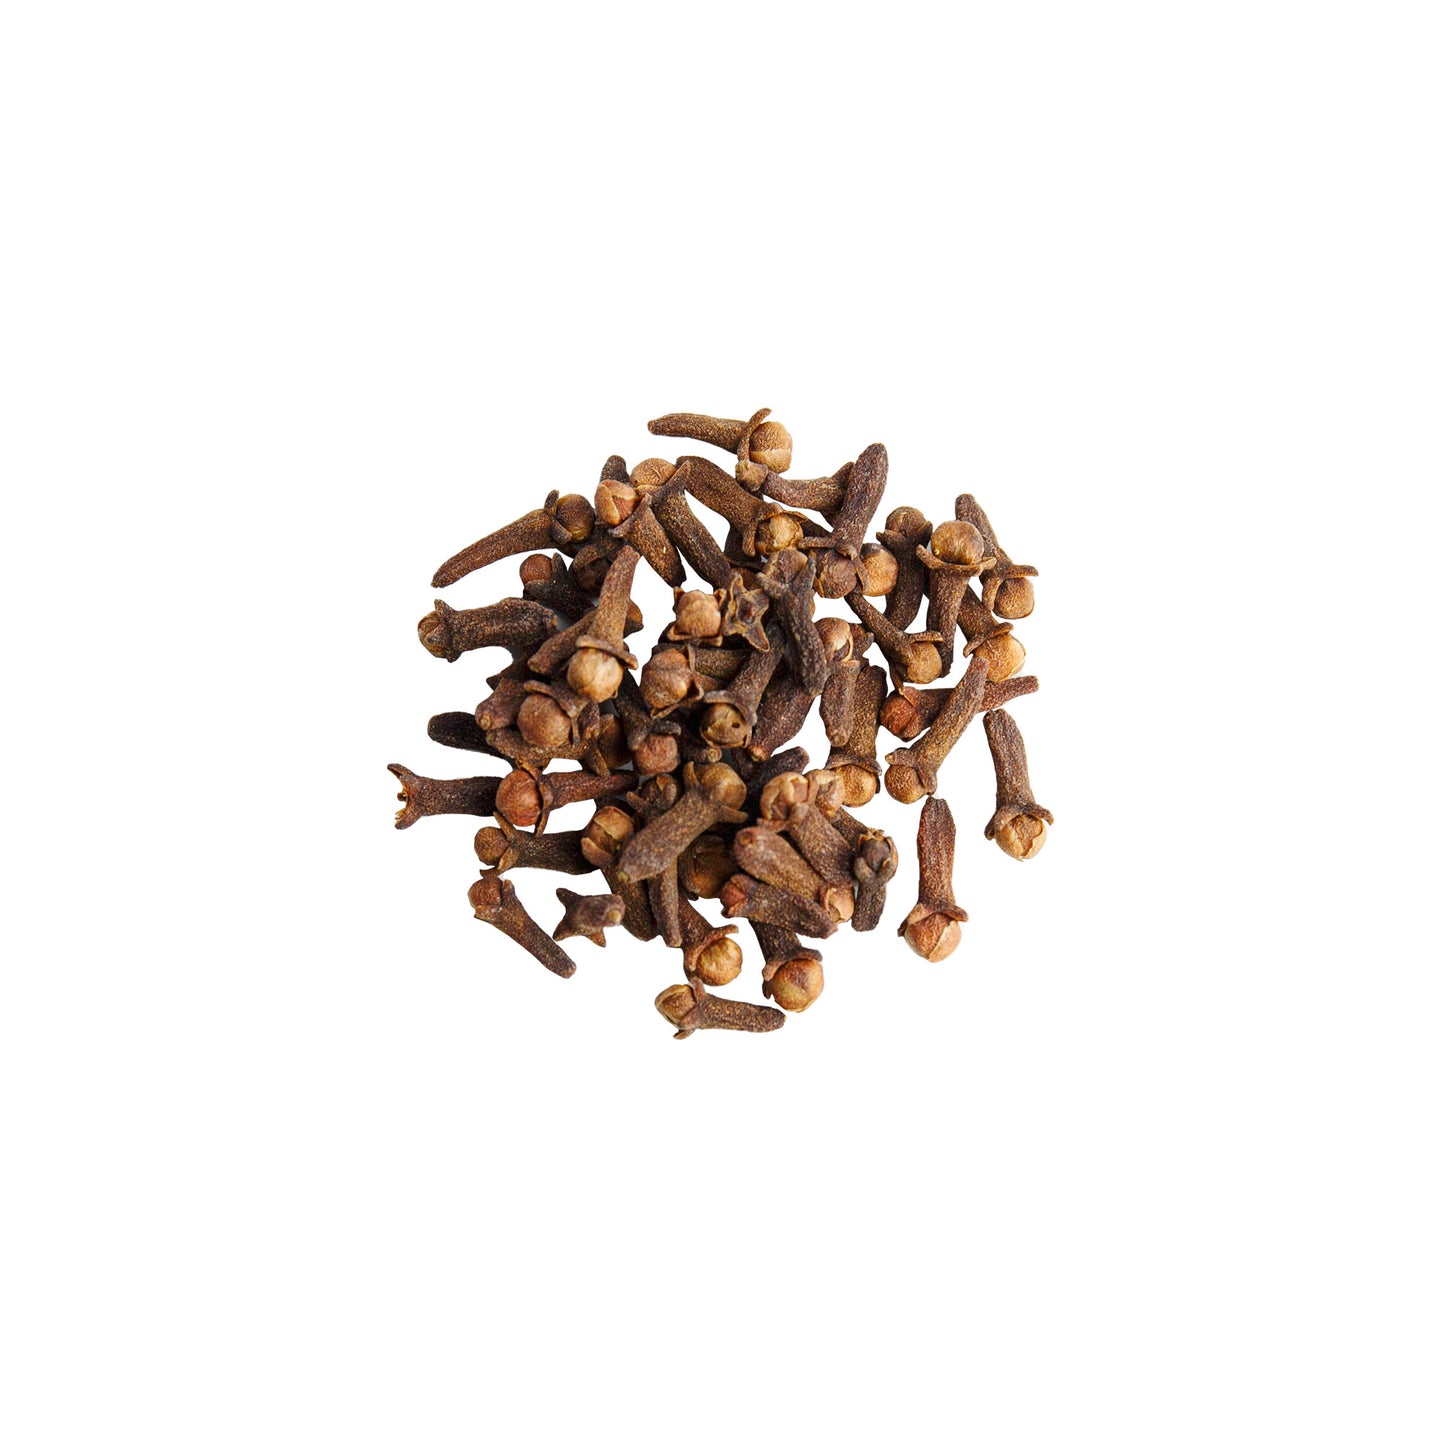 Primary Image of Cloves Whole